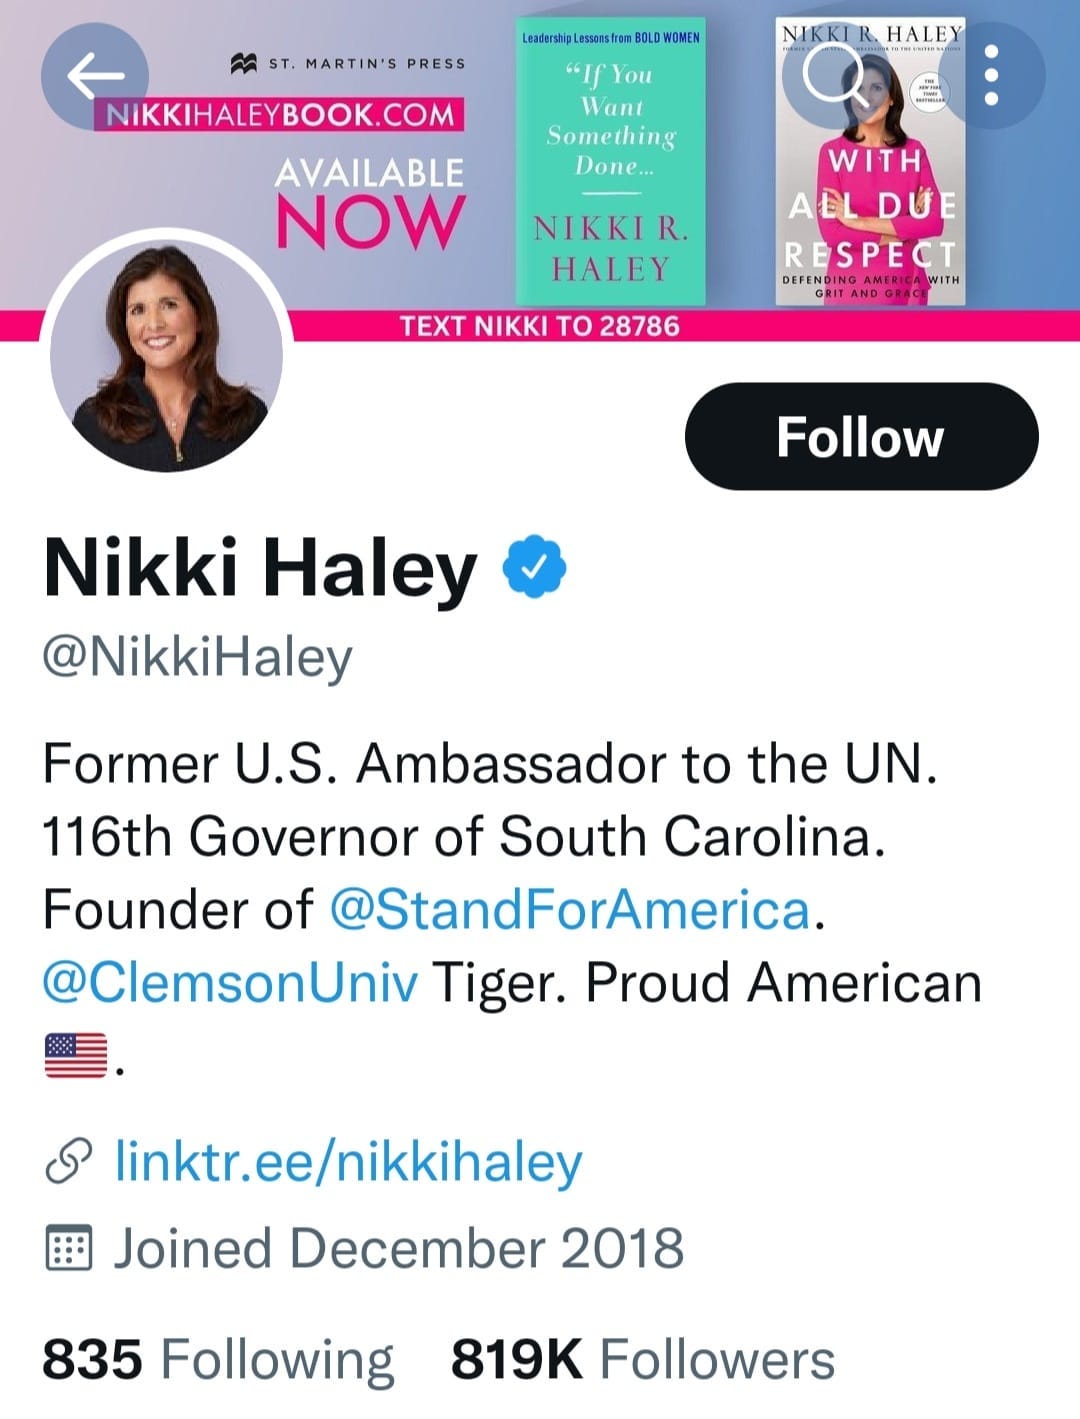 May be a Twitter screenshot of 2 people and text that says 'Leadership esorsten BOLD HOMEN You Want Something Done... NIKKI ST. MARTIN'S PRESS NIKKIHALEYBOOK.COM AVAILABLE NOW HALEY NIKKI R. HALEY WITH ADL DUE RESPECT WITH TEXT NIKKI To 28786 Follow Nikki Haley @NikkiHaley Former U.S. Ambassador to the UN. 116th Governor of South Carolina. Founder of @StandForAmerica. @ClemsonUniv Tiger. Proud American linktr.ee/nikkihaley Joined December 2018 835 Following 819K Followers'